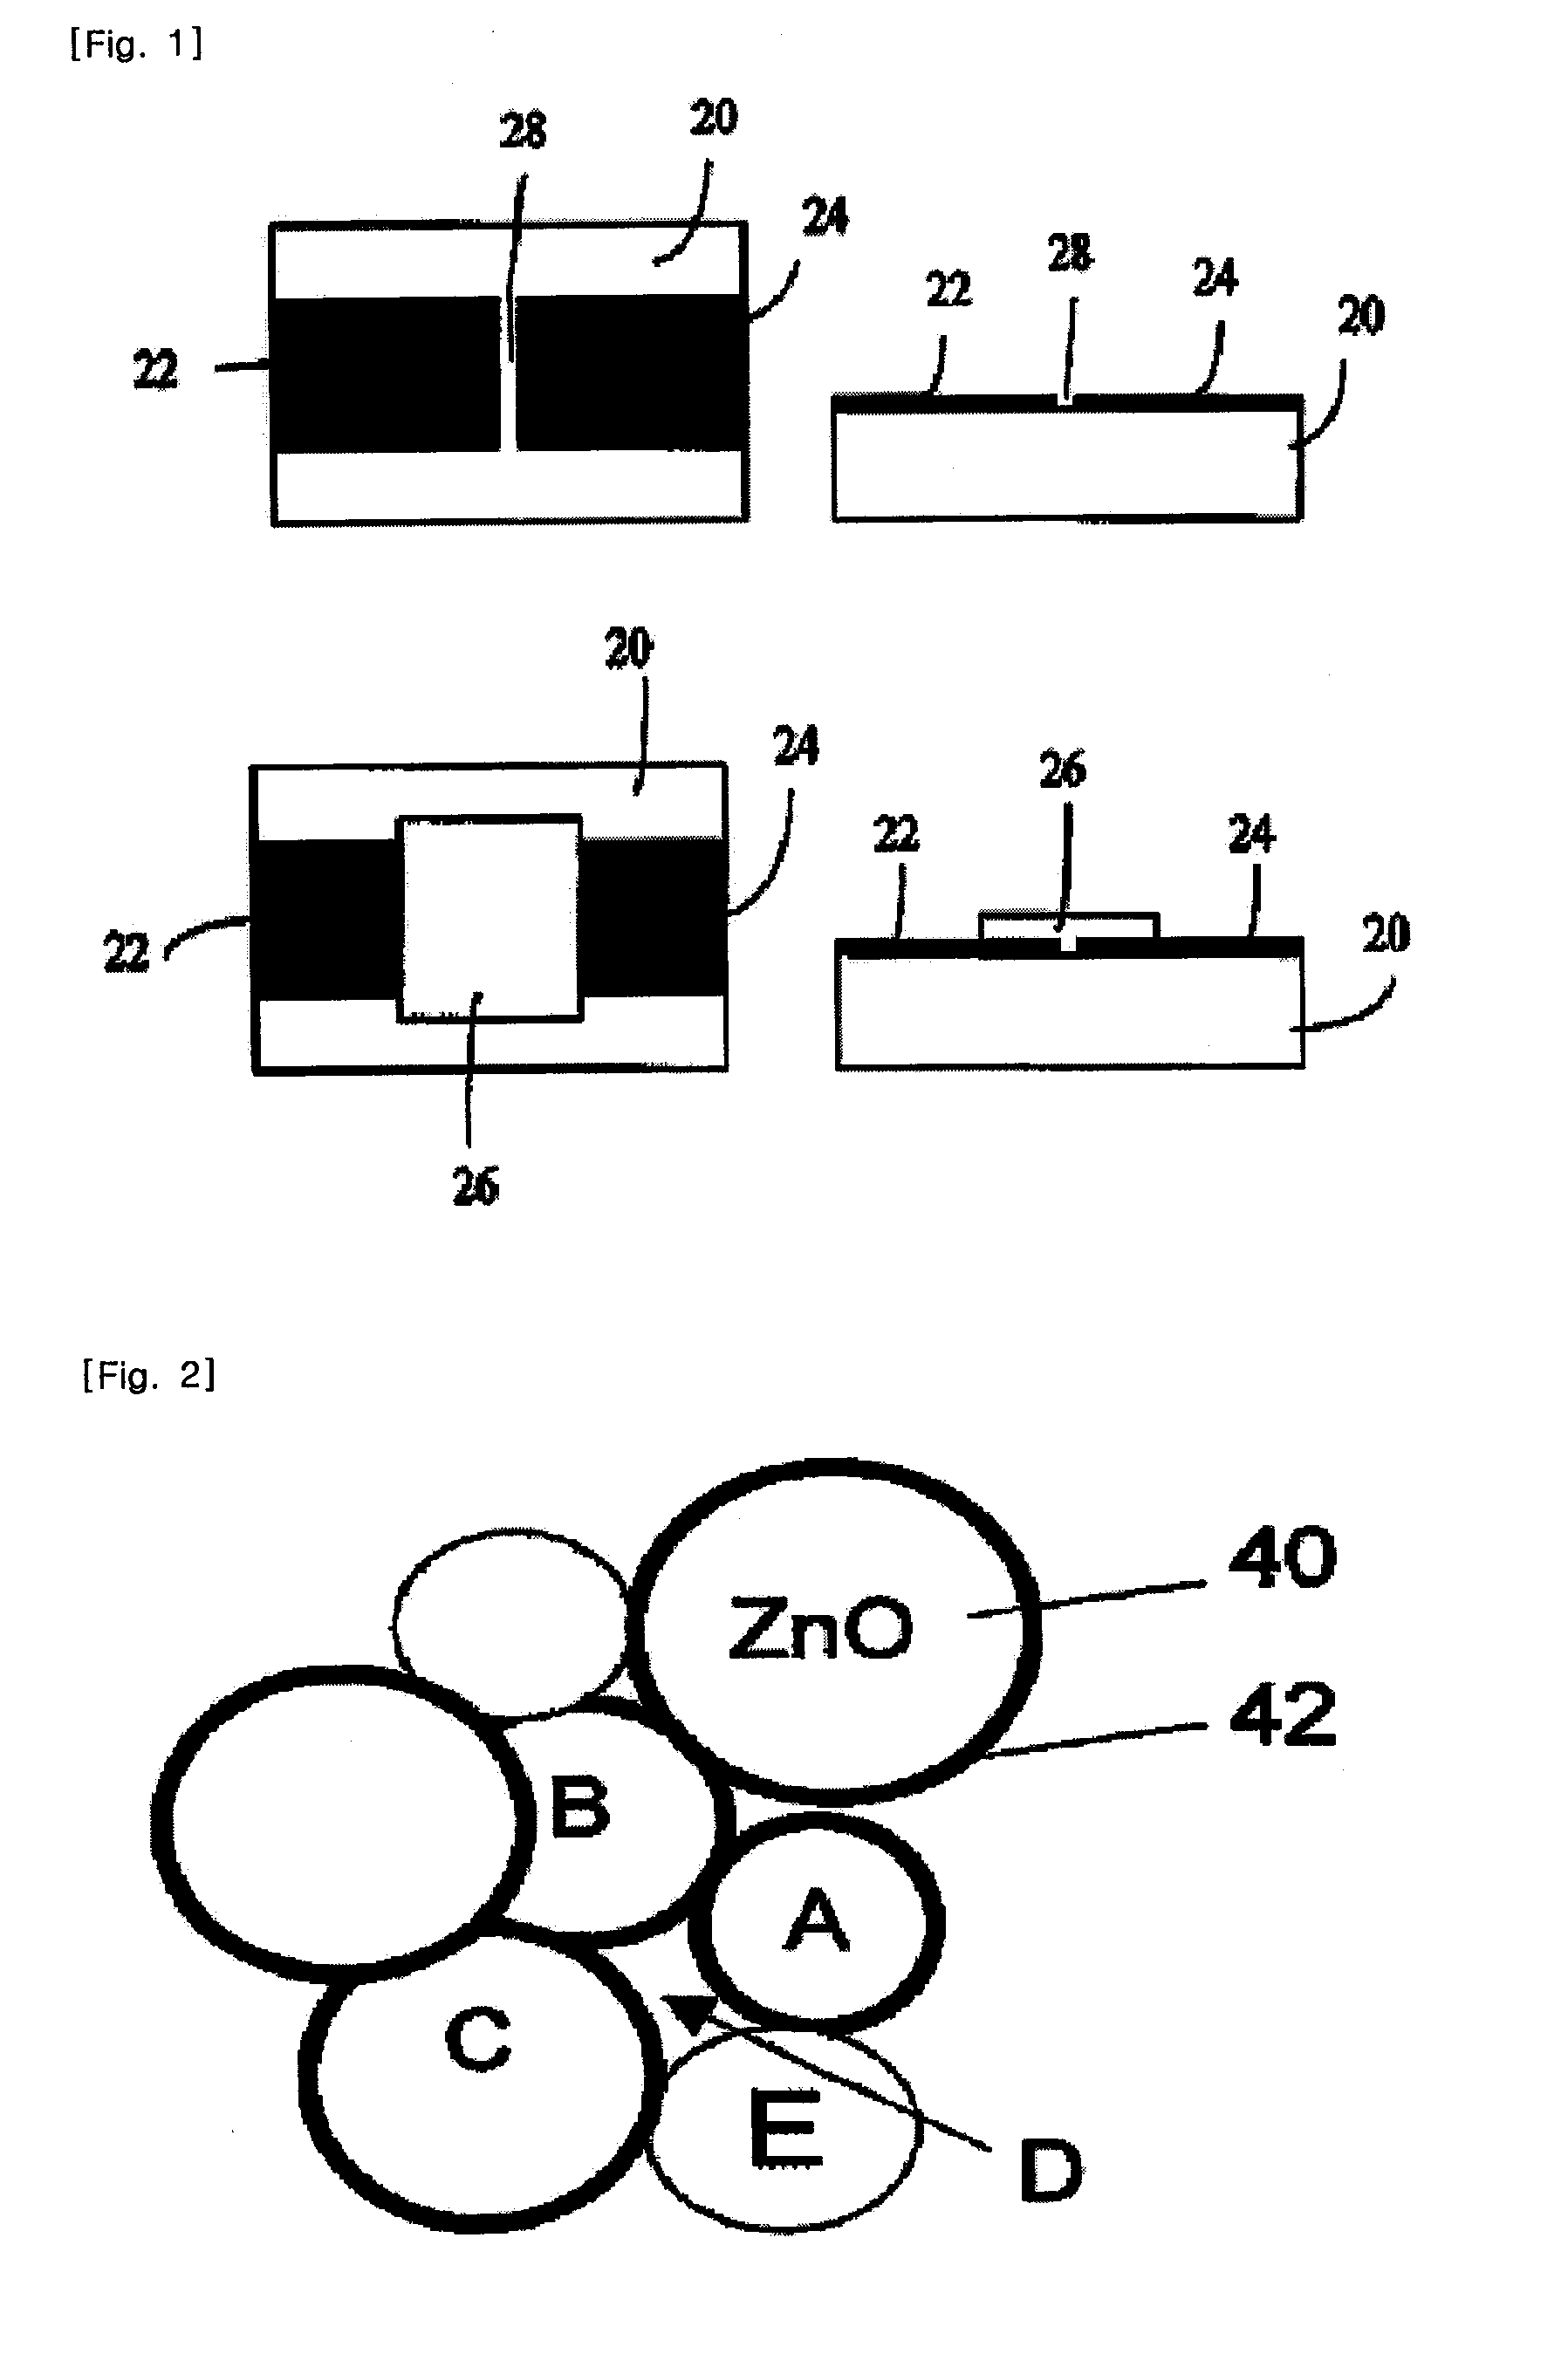 ESD protective device having low capacitance and stability and a preparing process thereof